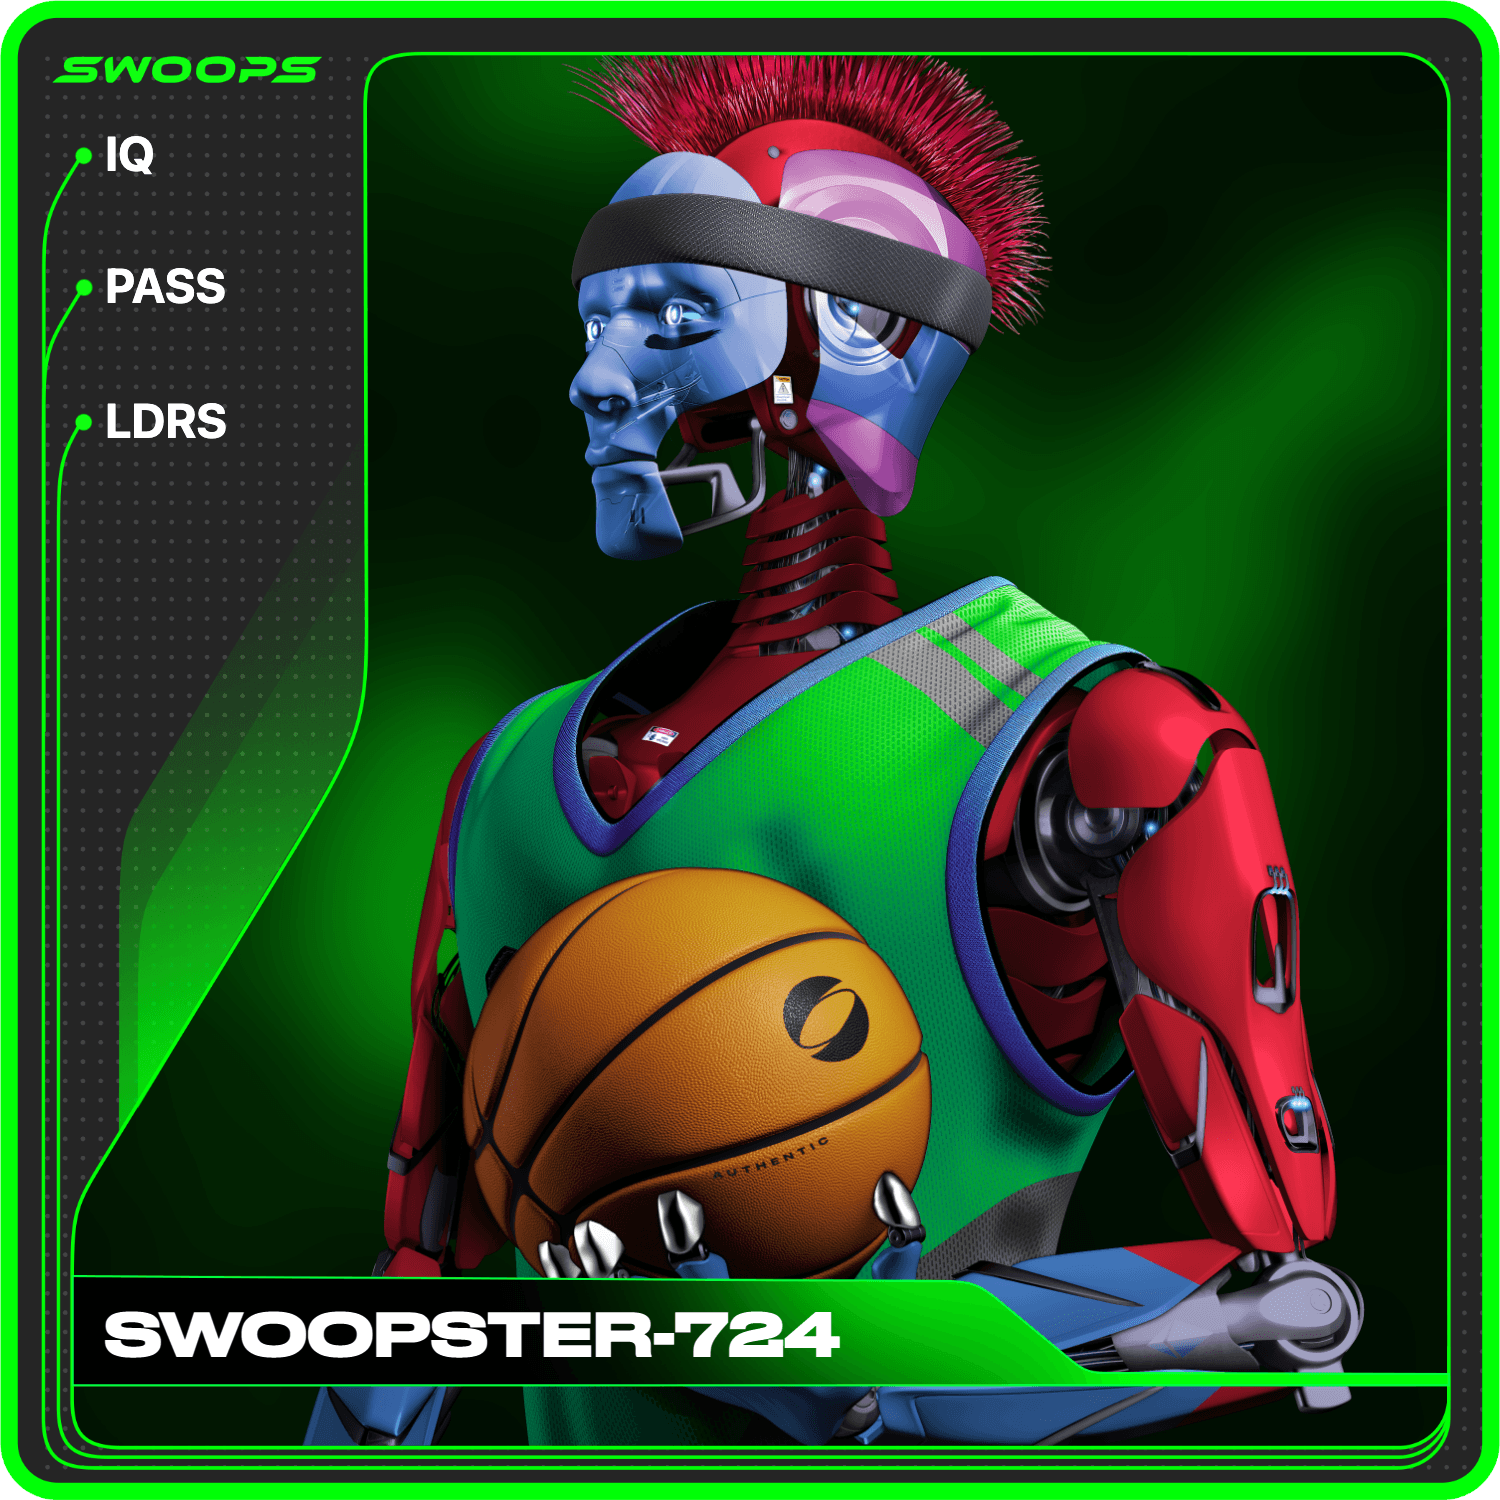 SWOOPSTER-724